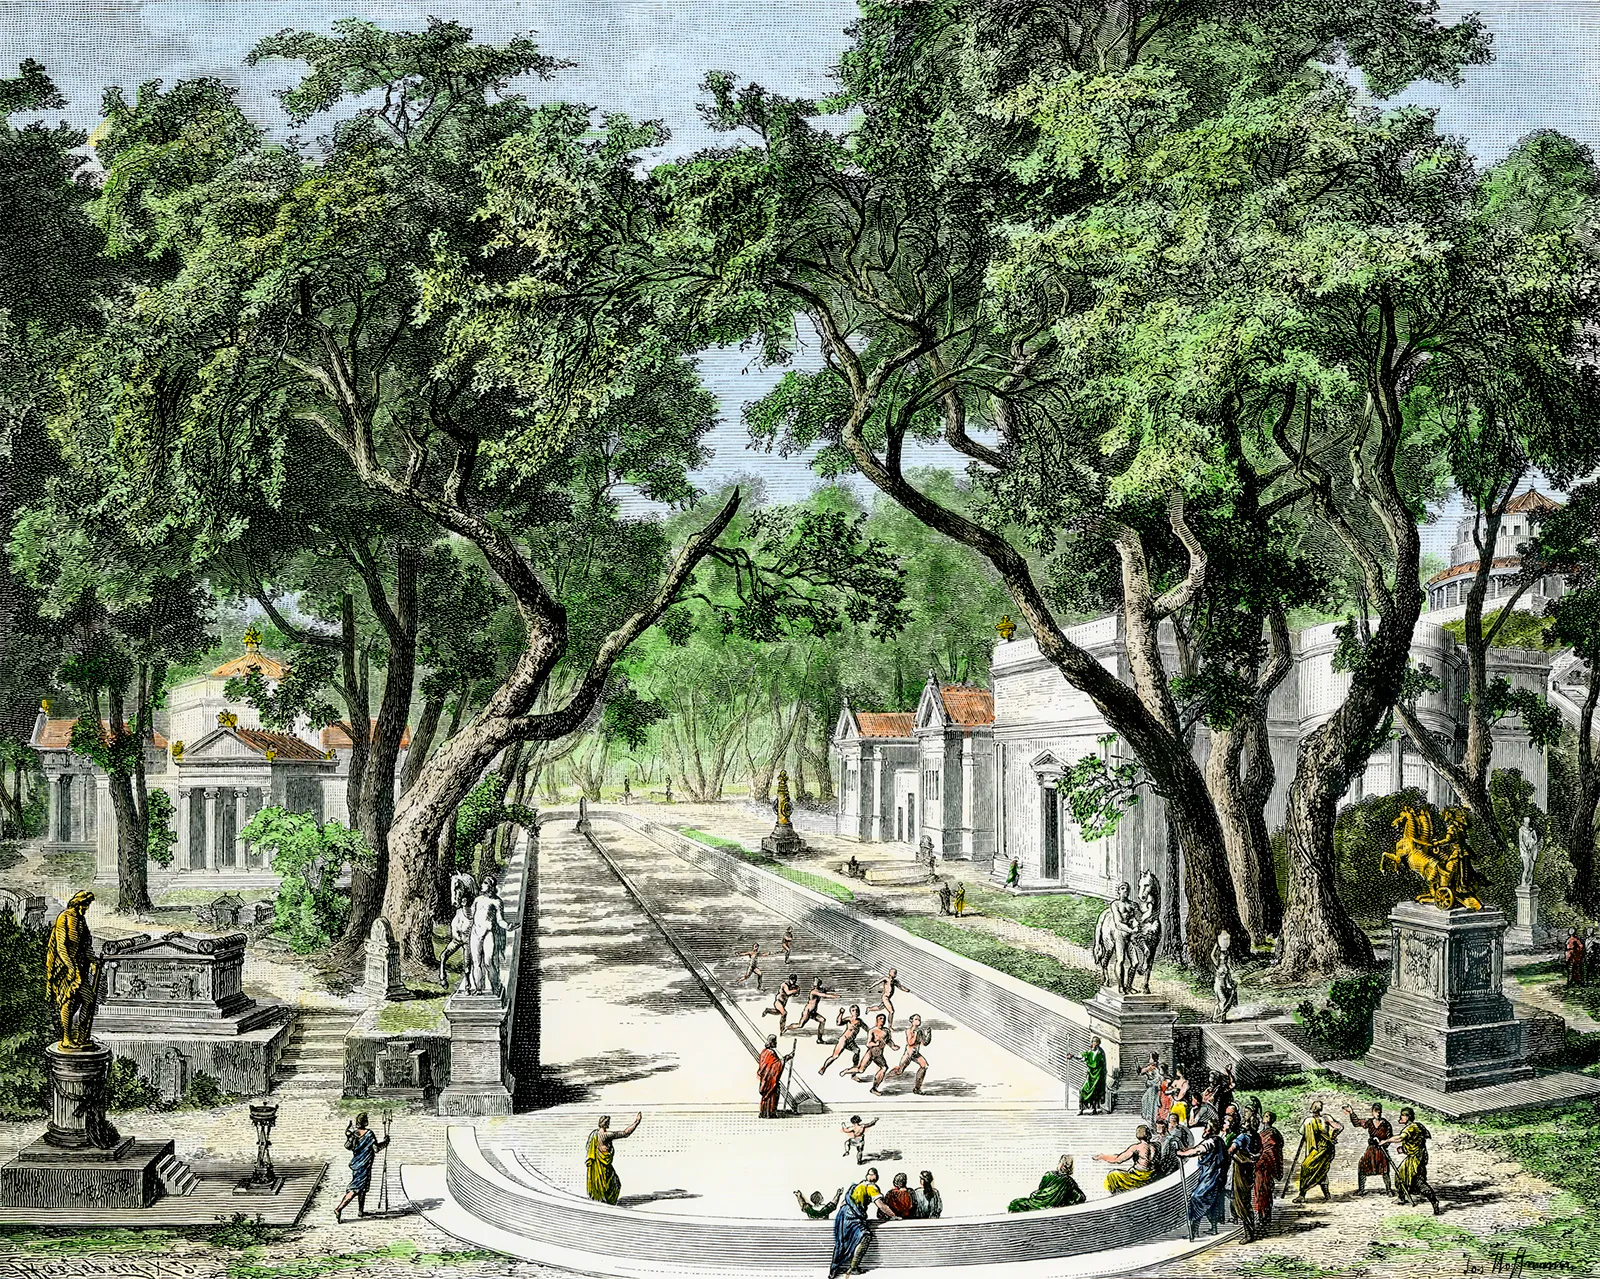 A detailed illustration depicting boys training in ancient Sparta. The scene unfolds in a lush, tree-lined avenue with classical architecture on either side. In the foreground, a group of young boys engage in athletics. Onlookers, possibly trainers or older citizens, watch their progress. Statues and monuments adorn the path, emphasizing the significance of martial training in Spartan culture. The overall atmosphere suggests discipline, tradition, and the importance of physical prowess in the Spartan way of life.